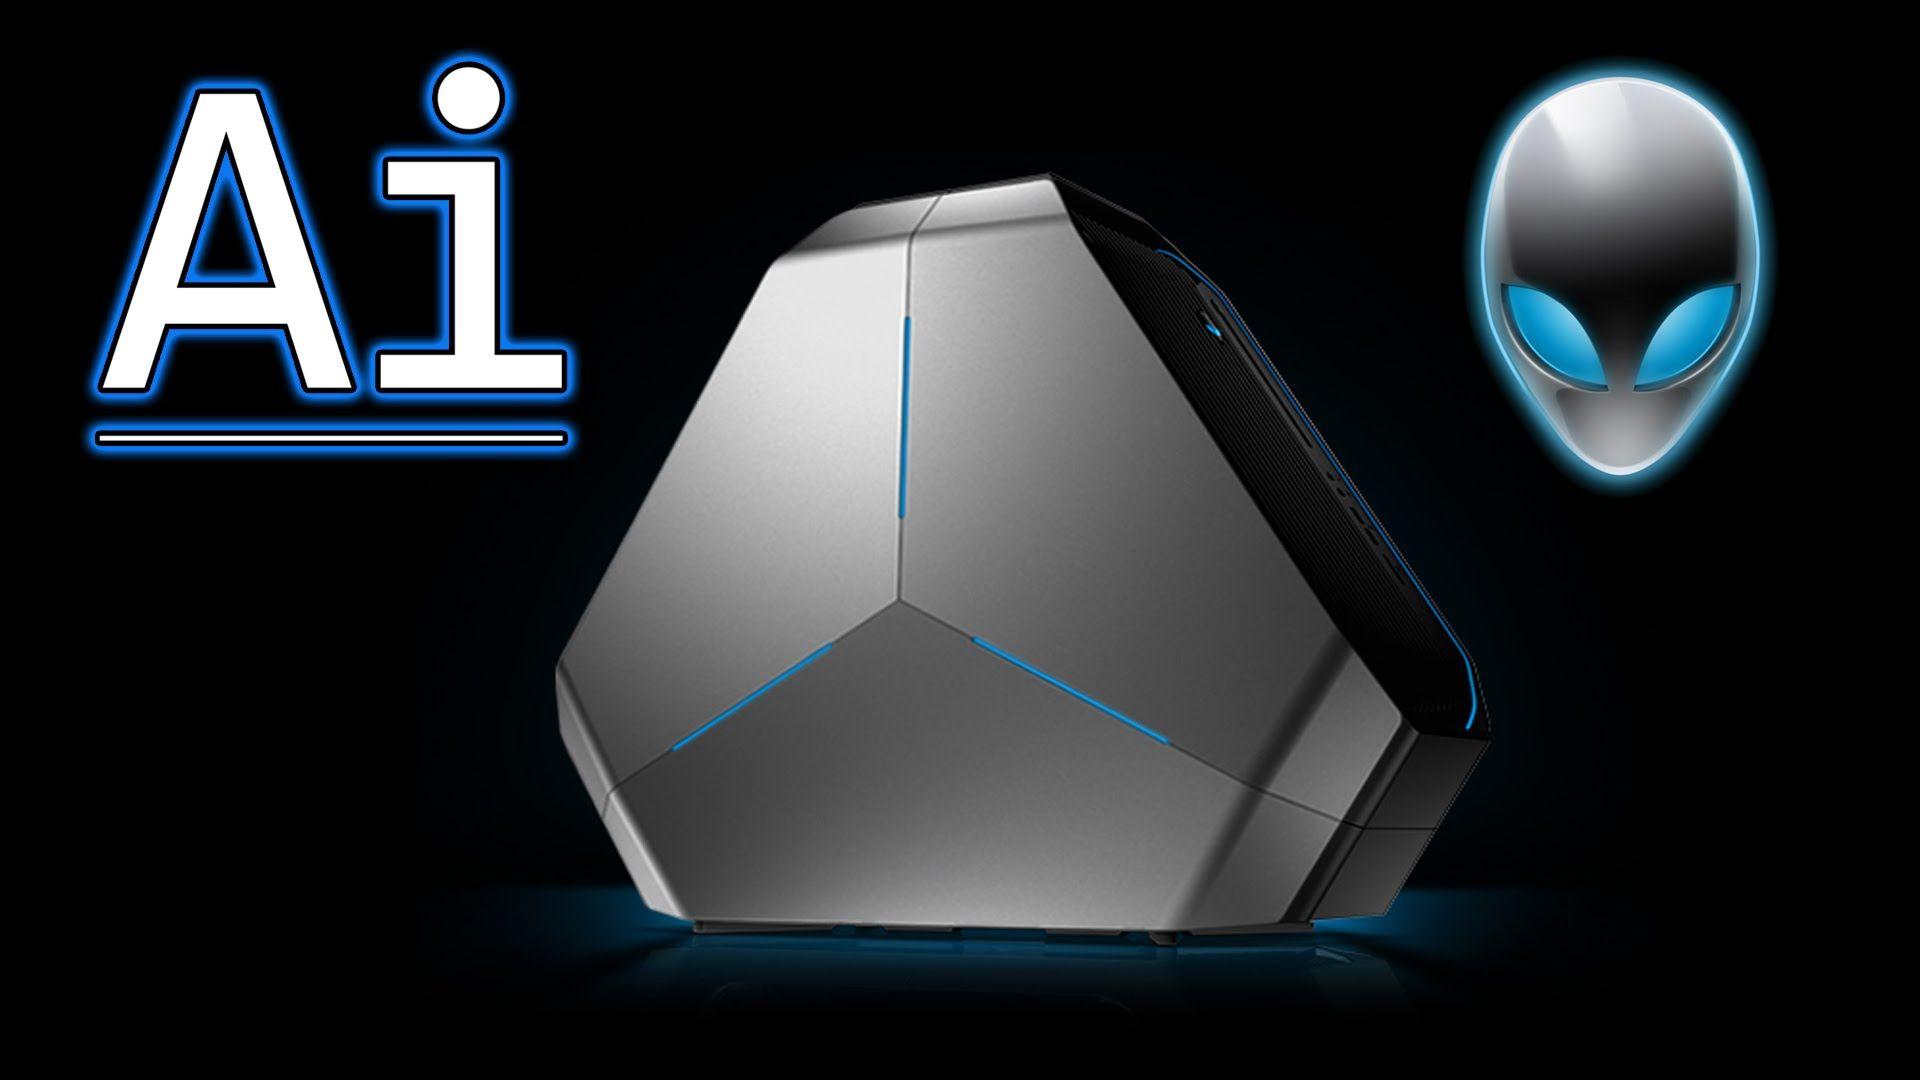 Alienware's Area 51 PC is 4K Ready and Looks